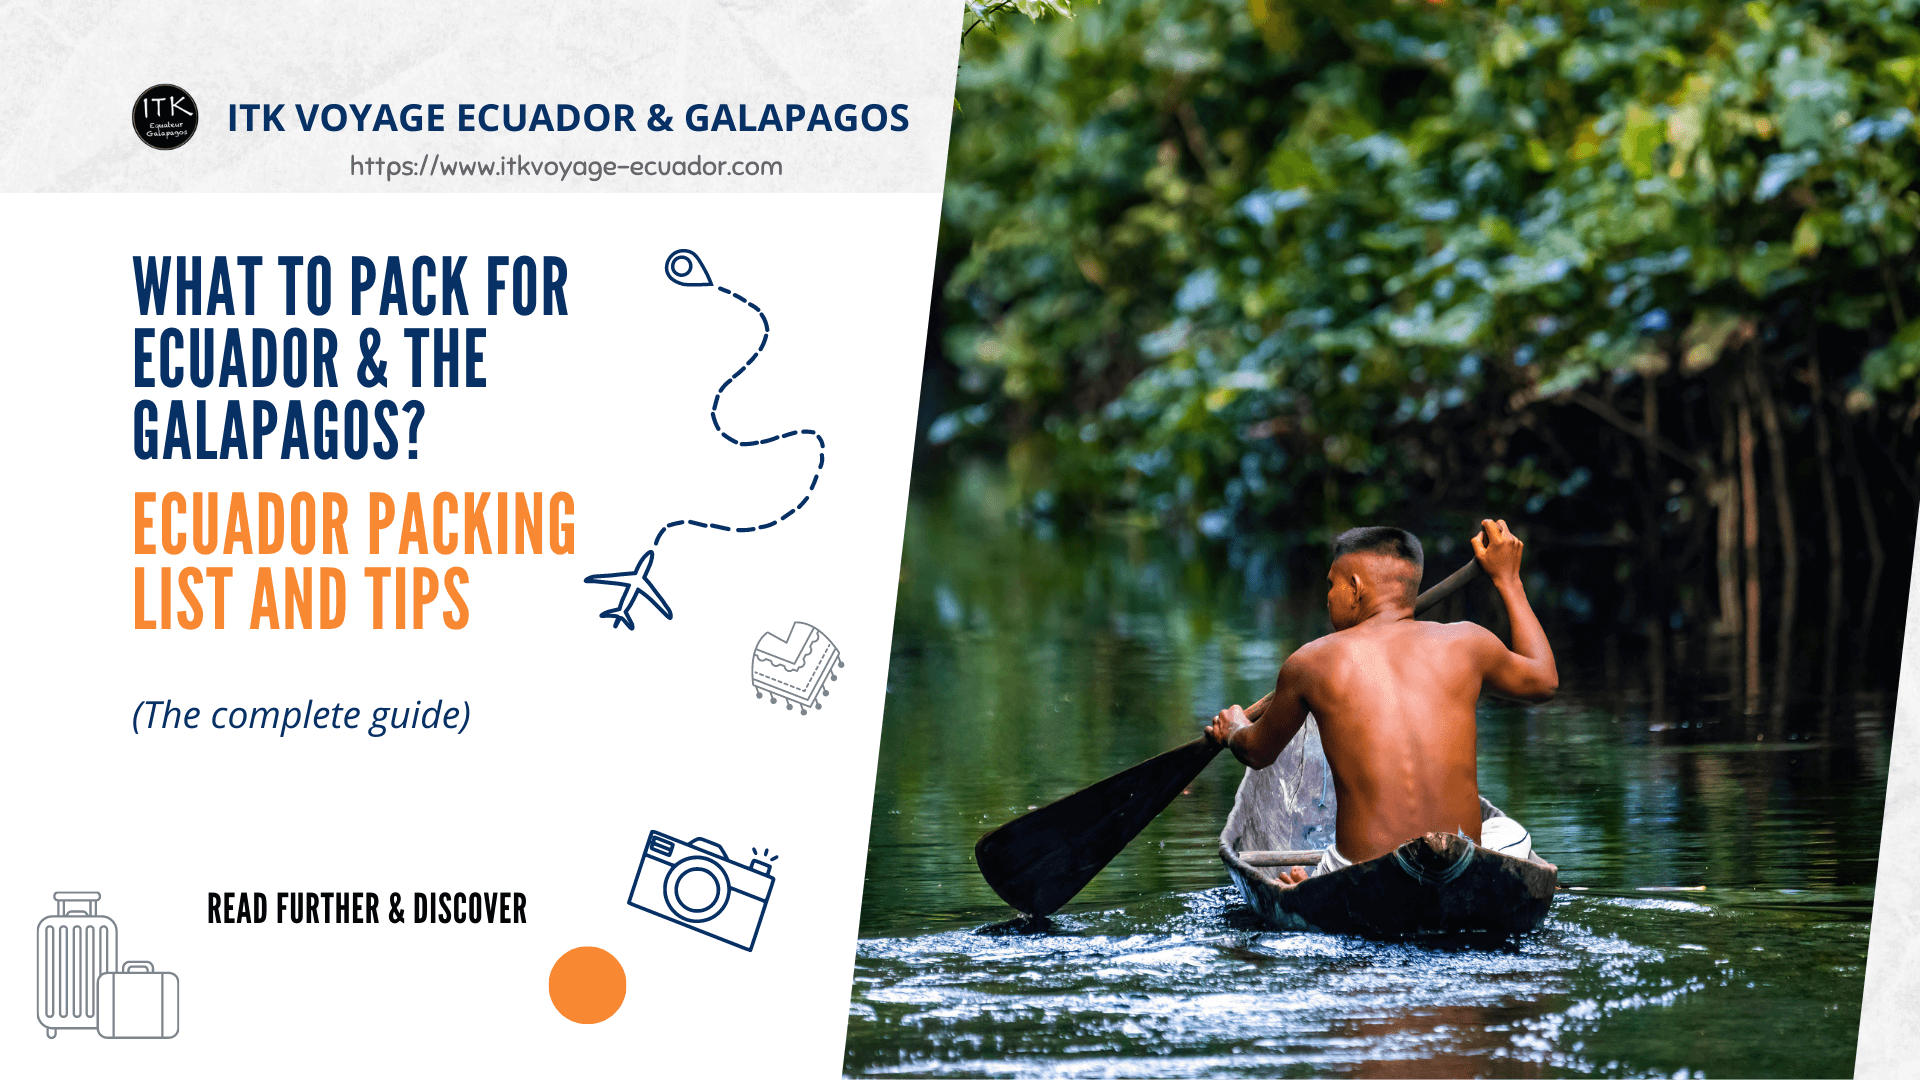 What to pack for Ecuador and the Galapagos? Ecuador packing list and tips (The complete guide'cover)